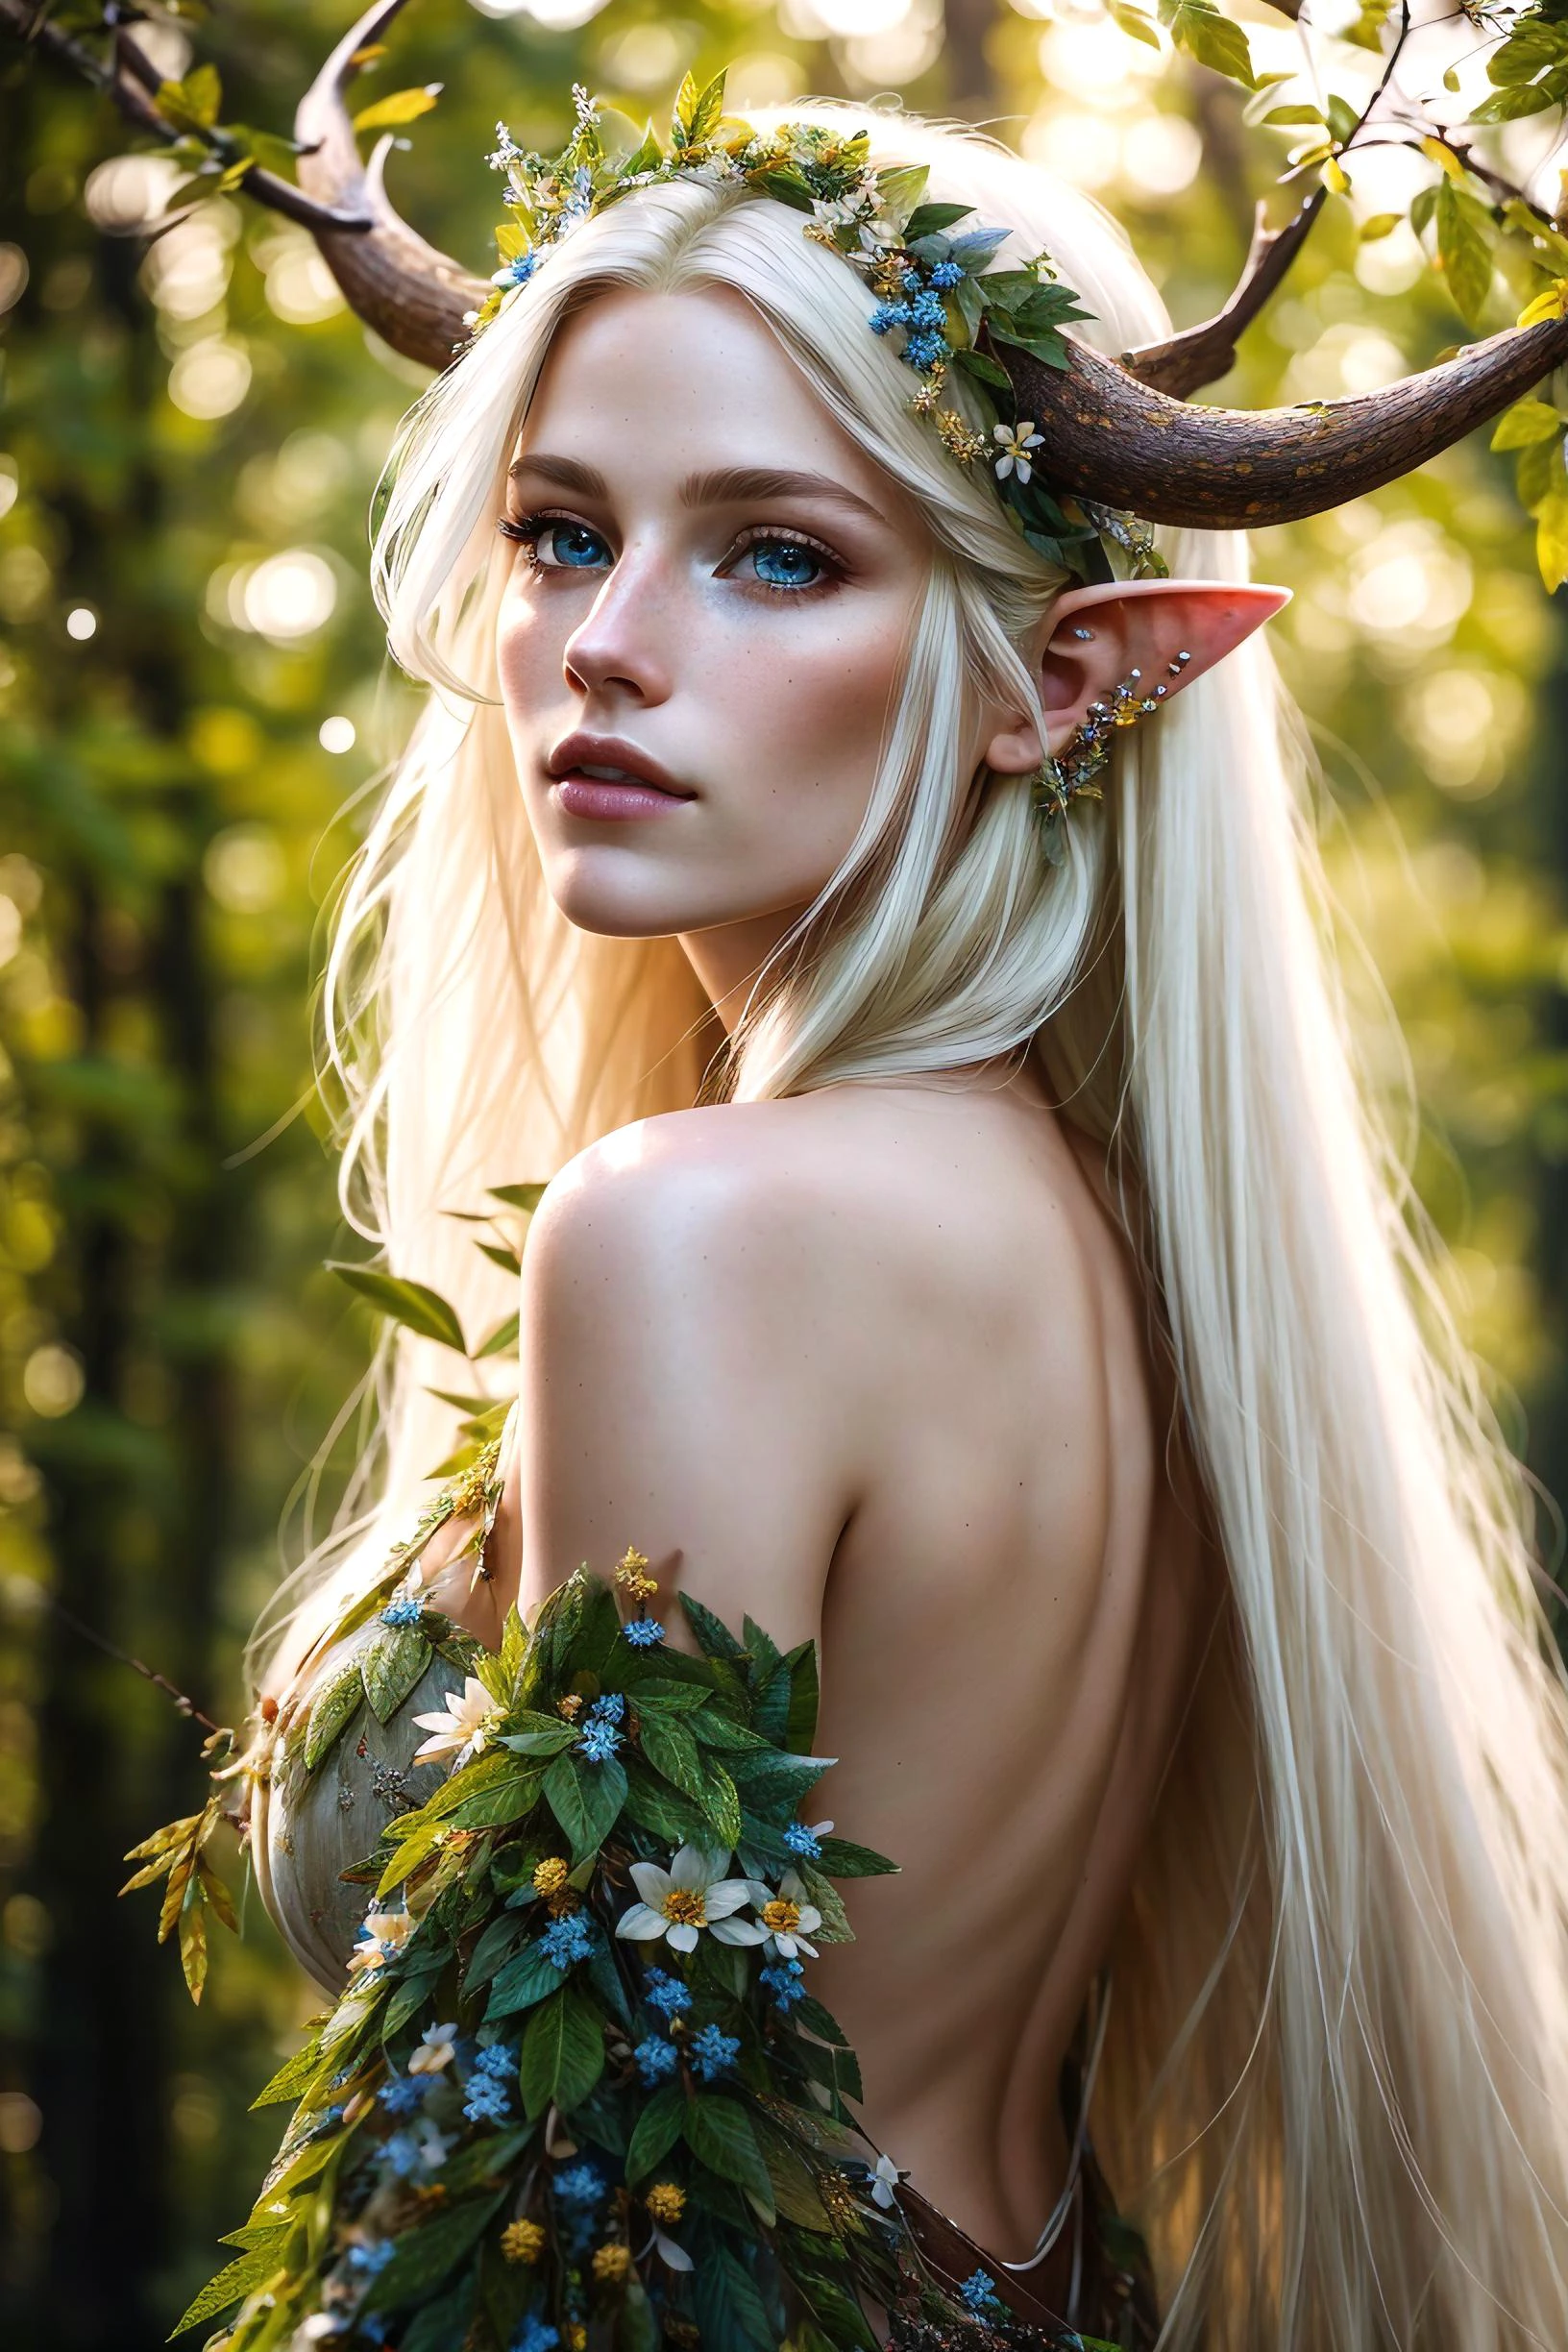 (realistic:1.35), (concept art), (cowboy shot), (majestic goddess of the forest), (gorgeous face, attractive, stunning), (long flowing pale blonde hair), humanoid body made entirely of flowers and foliage, (beautiful skin is green and made of intricately detailed leaves and vines), (antlers on head), (pointed ears), (shiny bright blue eyes), lush (enchanted forest) background, butterflies:0.35, leaves, bloom light effect, flowers:0.4, god rays, lights and dust motes, realistic skin texture, (back lighting), intricate, detailed, highest quality, hasselblad, Nikon D850, natural volumetric lighting, (good anatomy), good composition, (good proportions), subsurface scattering, award winning, masterwork, masterpiece,